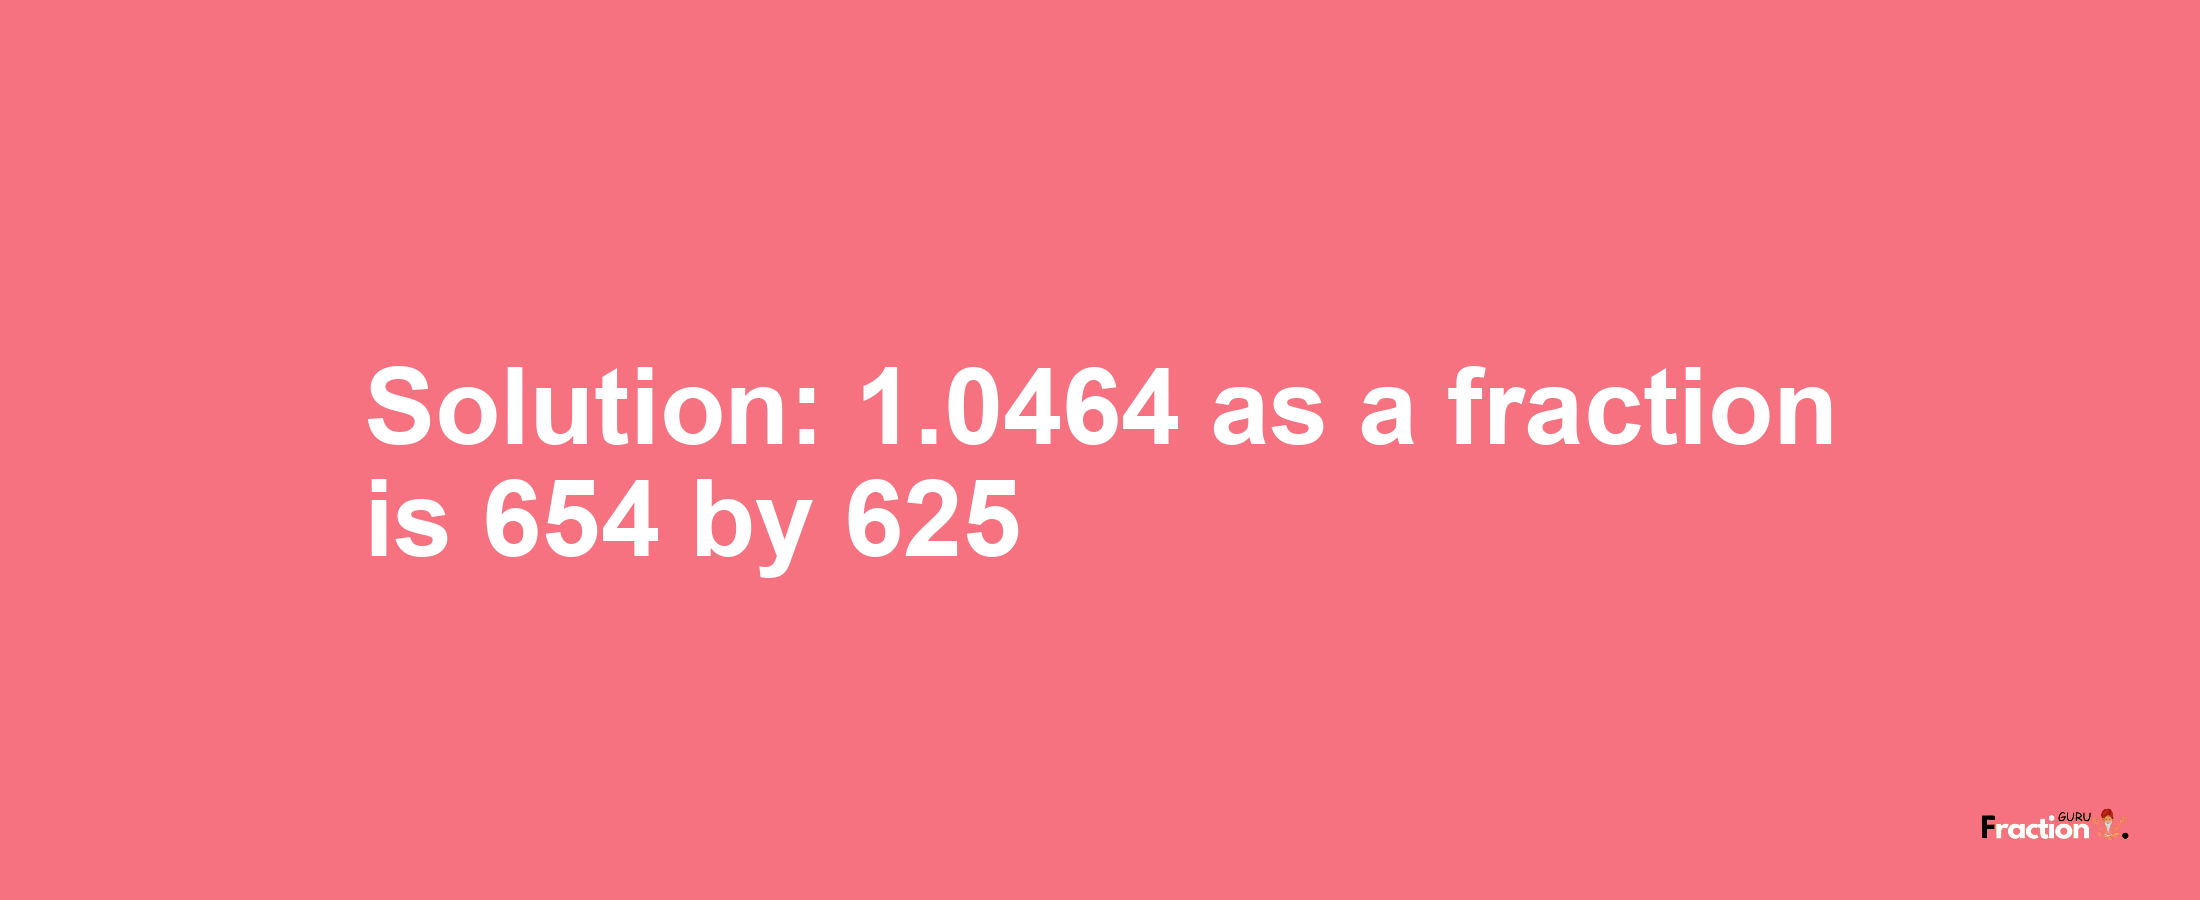 Solution:1.0464 as a fraction is 654/625